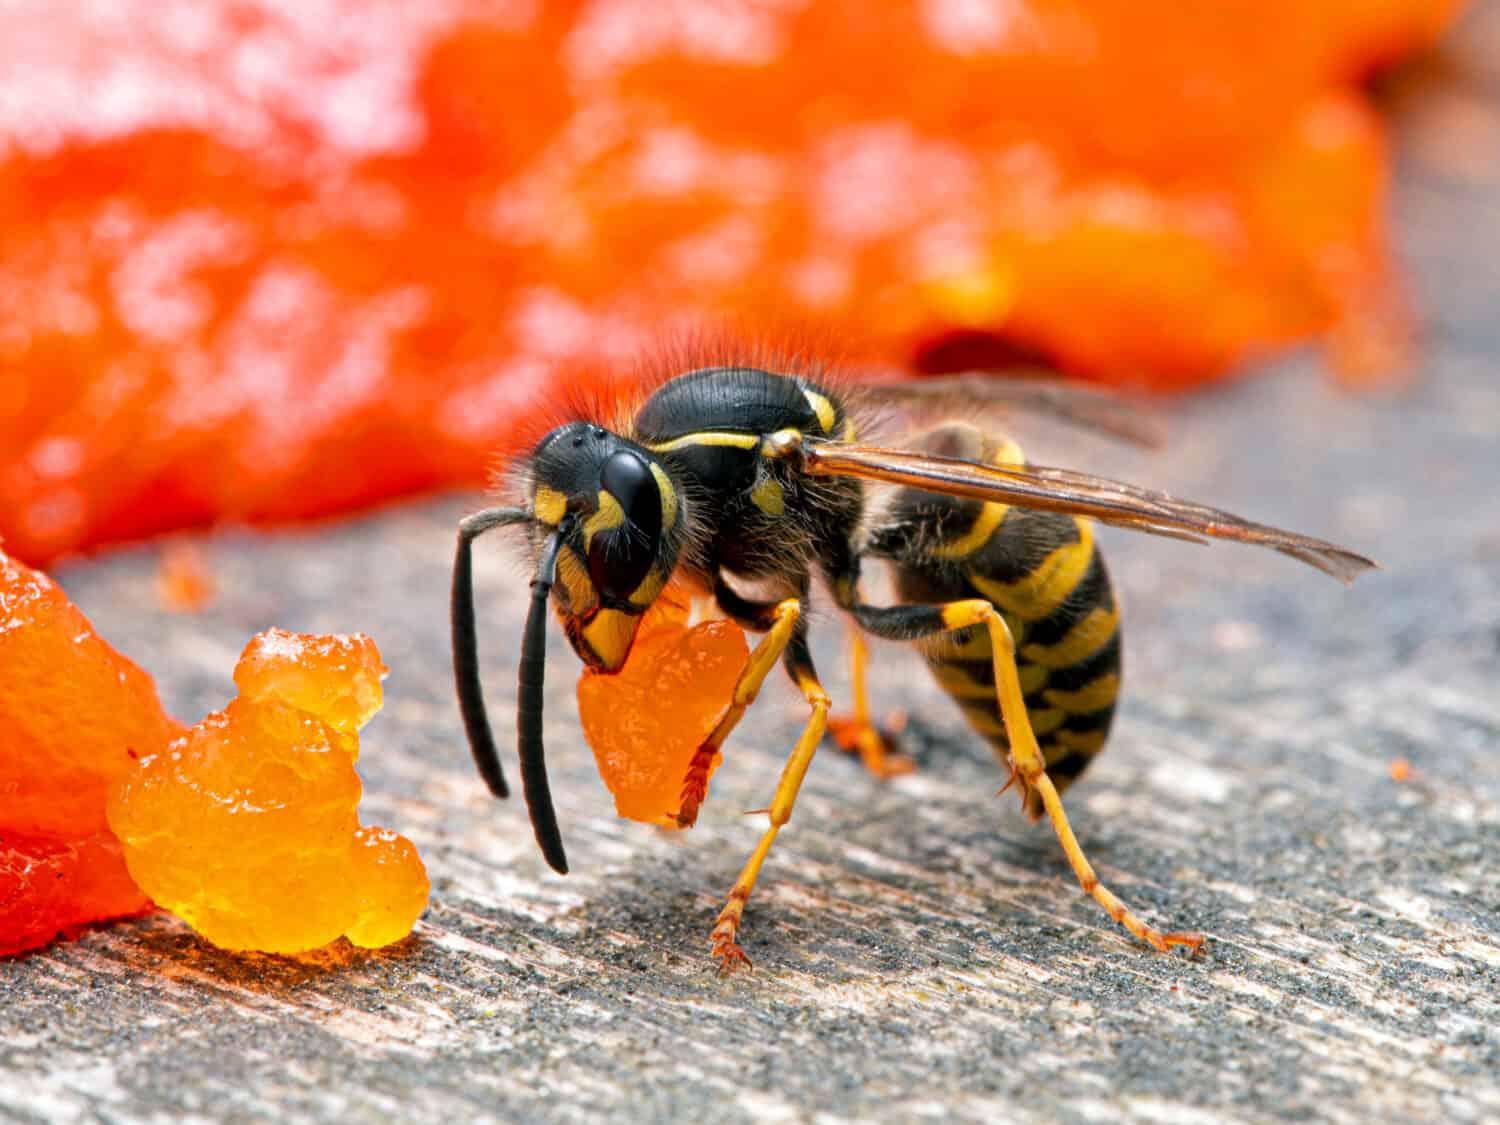 Western yellowjacket wasp, Vespula pensylvanica, carrying a piece of sockeye salmon flesh it chewed off of a salmon carcass. It is about to fly back to its nest to feed it to developing larvae